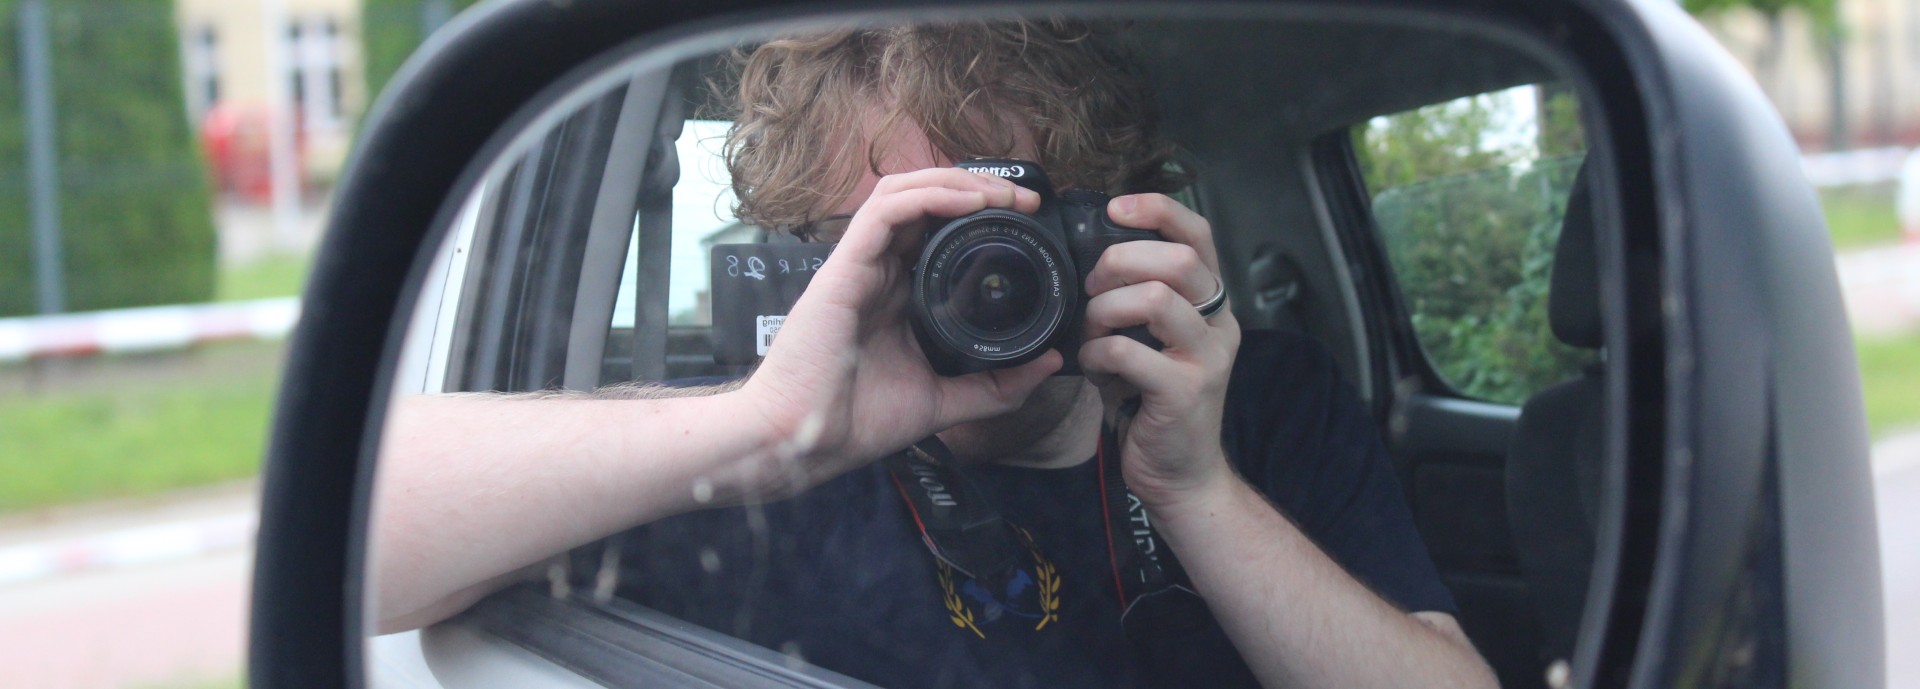 Kai takes a photo of himself in the wing mirror